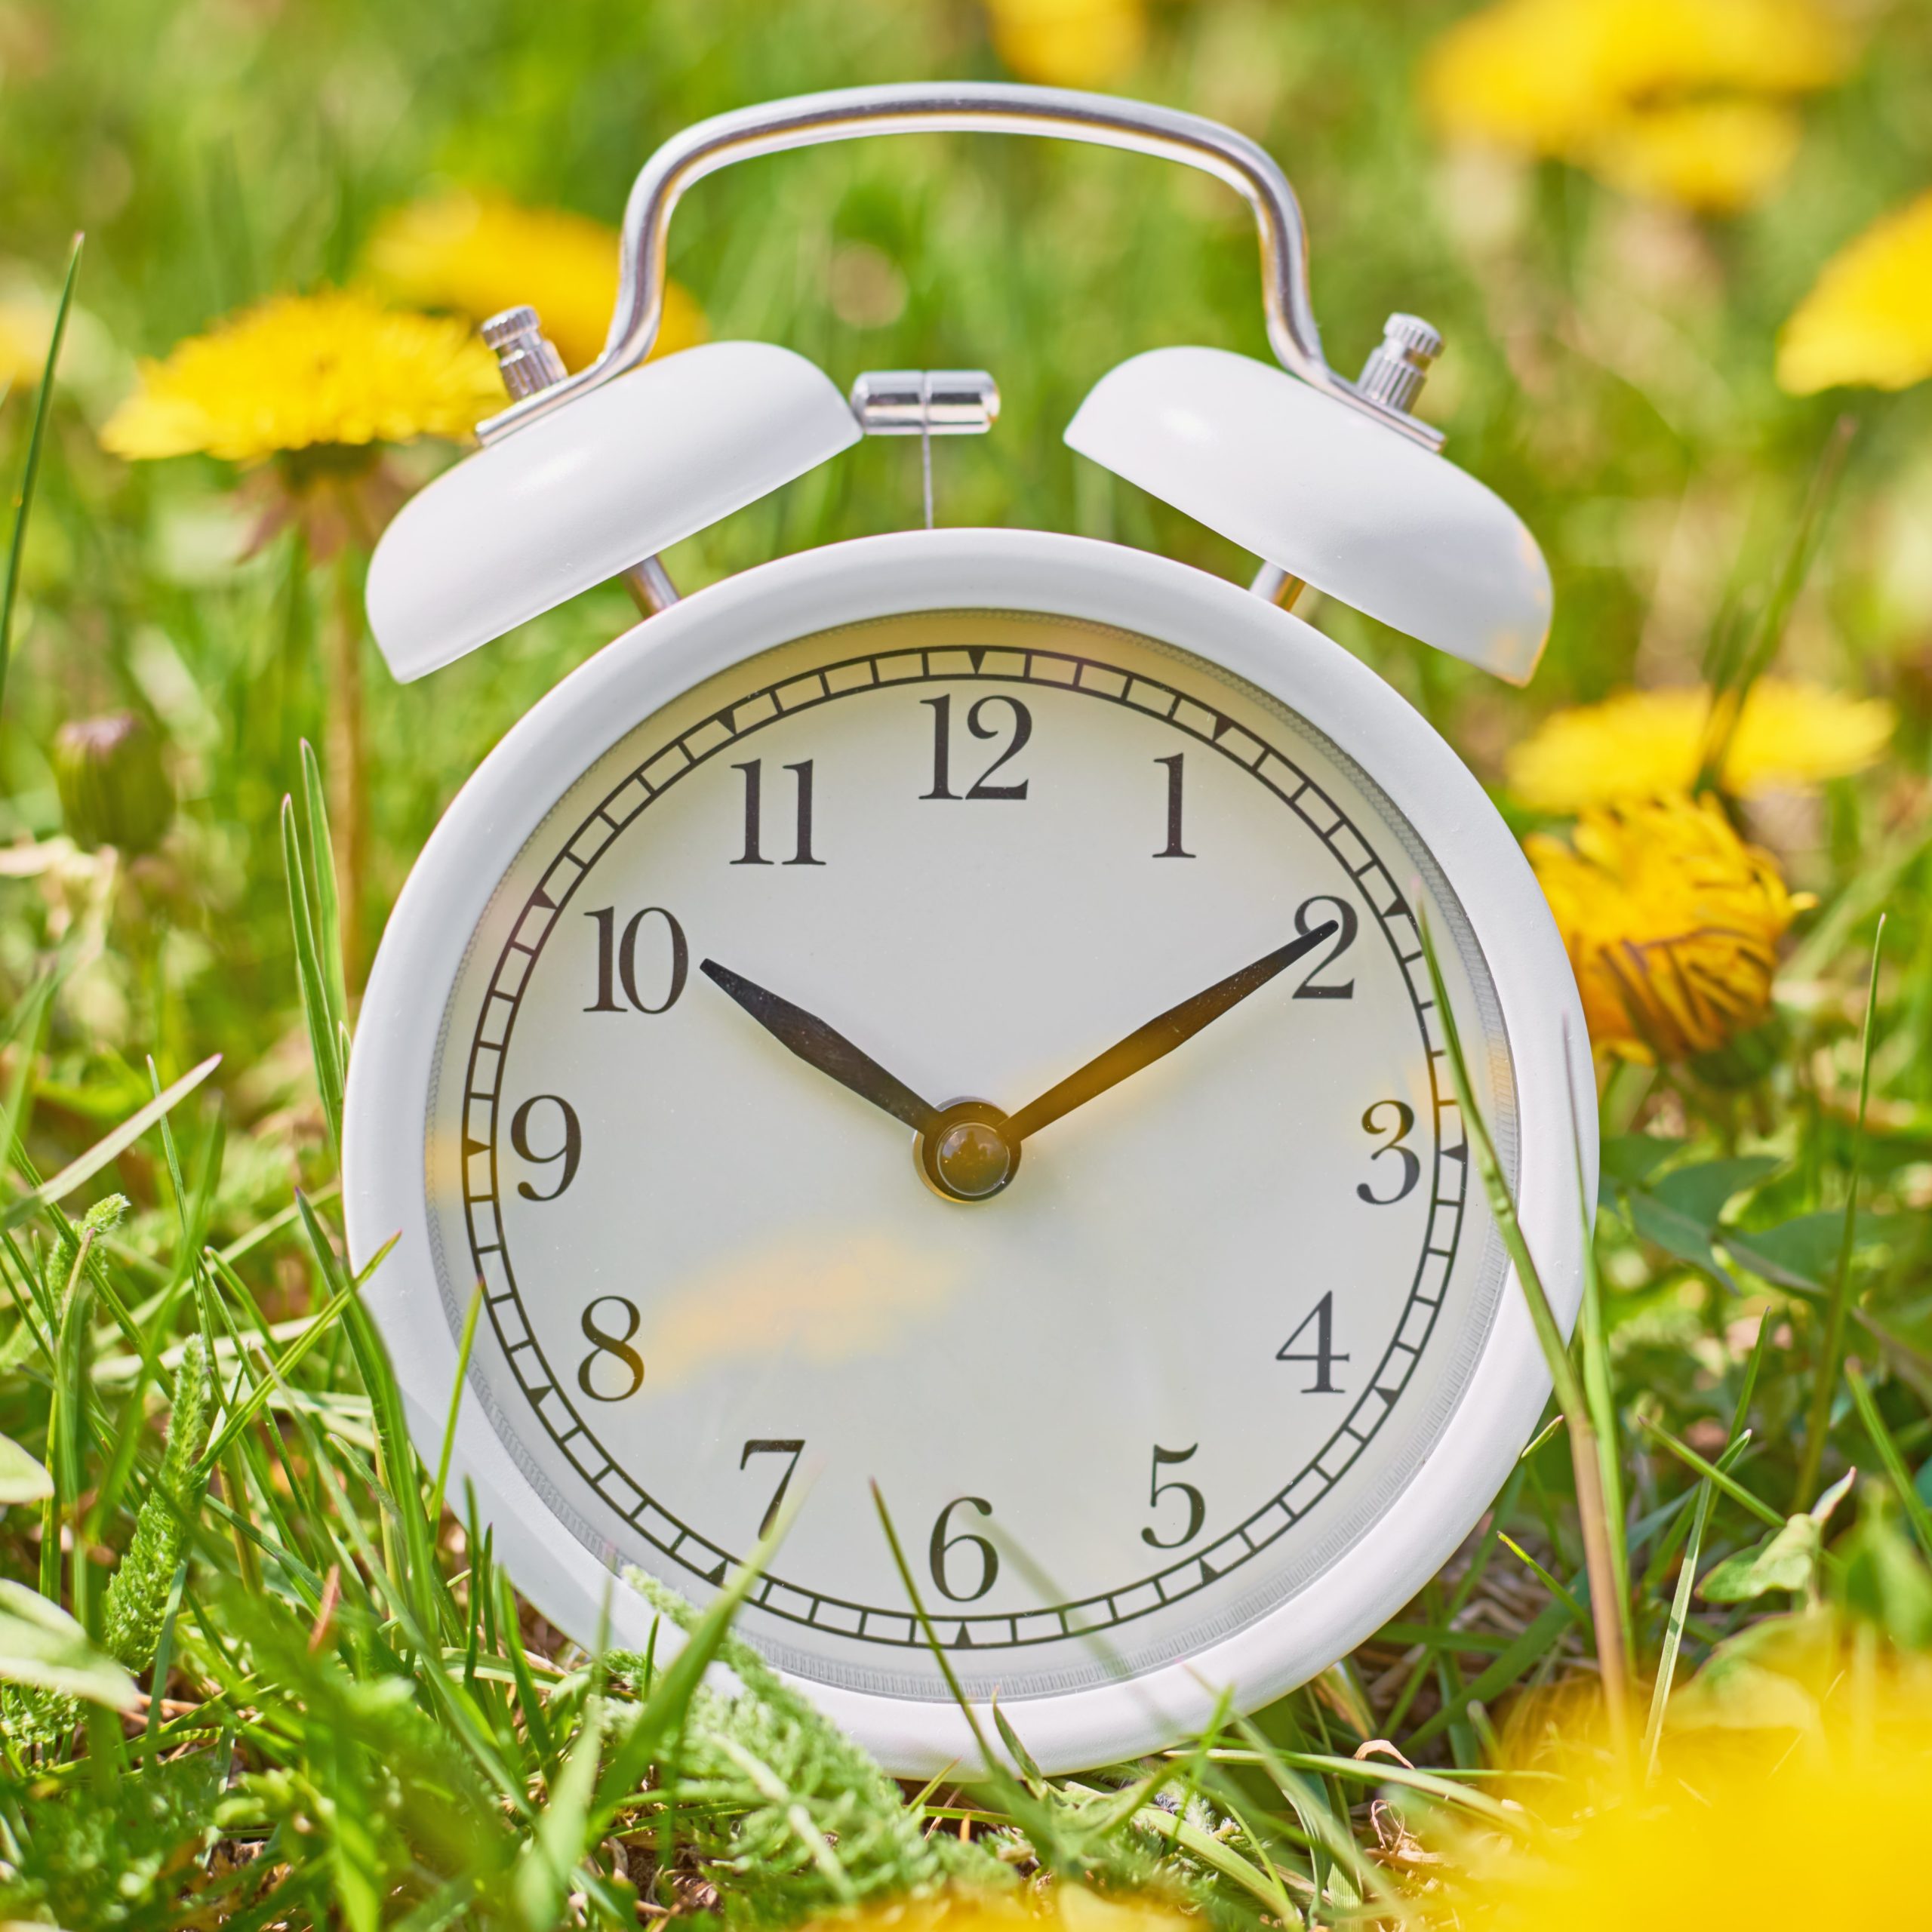 White vintage alarm clock in the grass with dandelion flowers. Deadline and change time concept